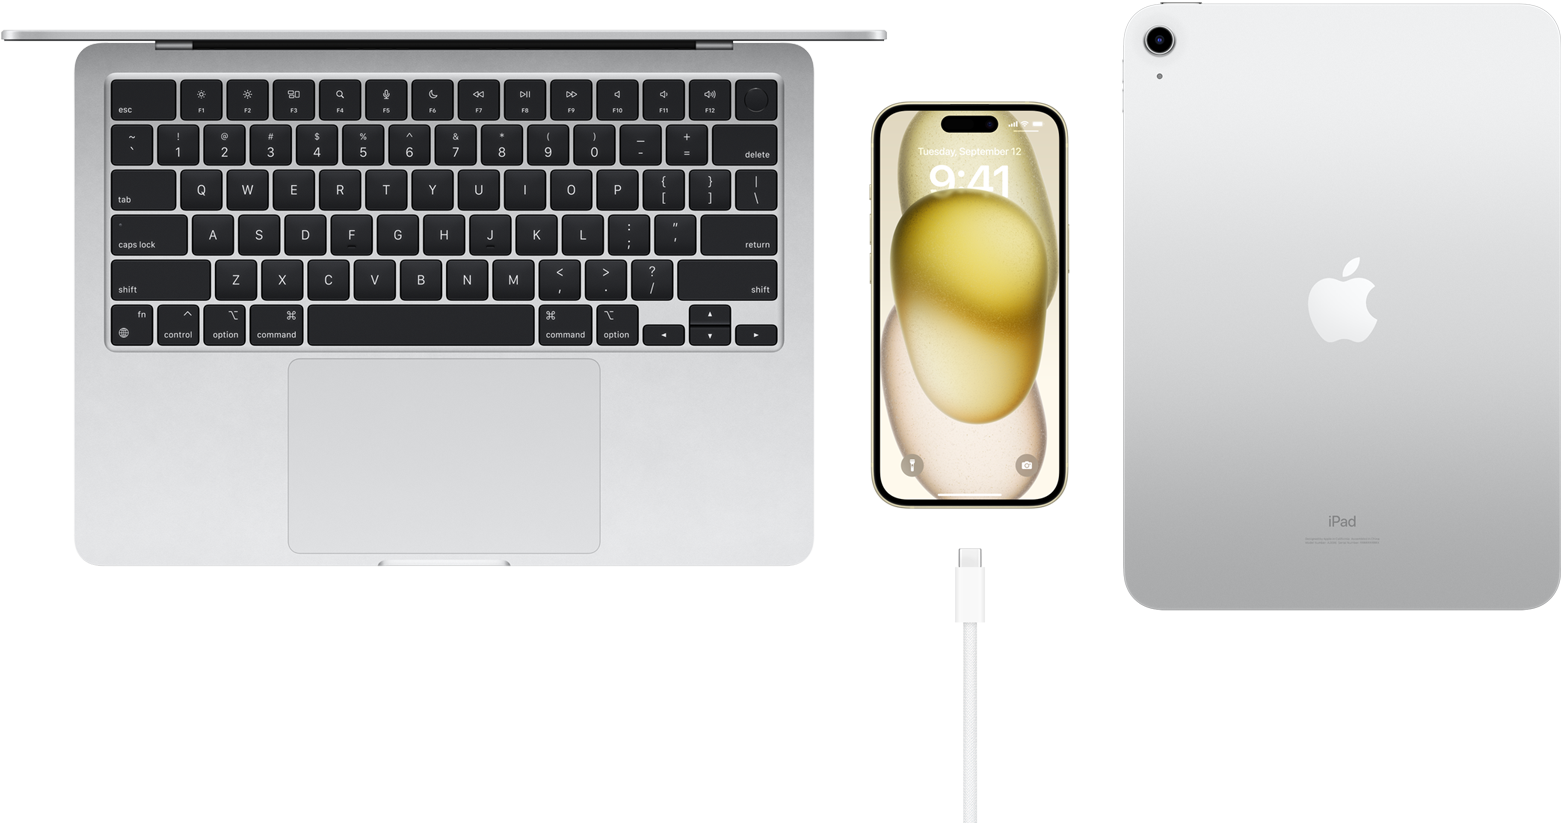 Top view of MacBook Pro, Phone 15 with a USB-C connector and iPad